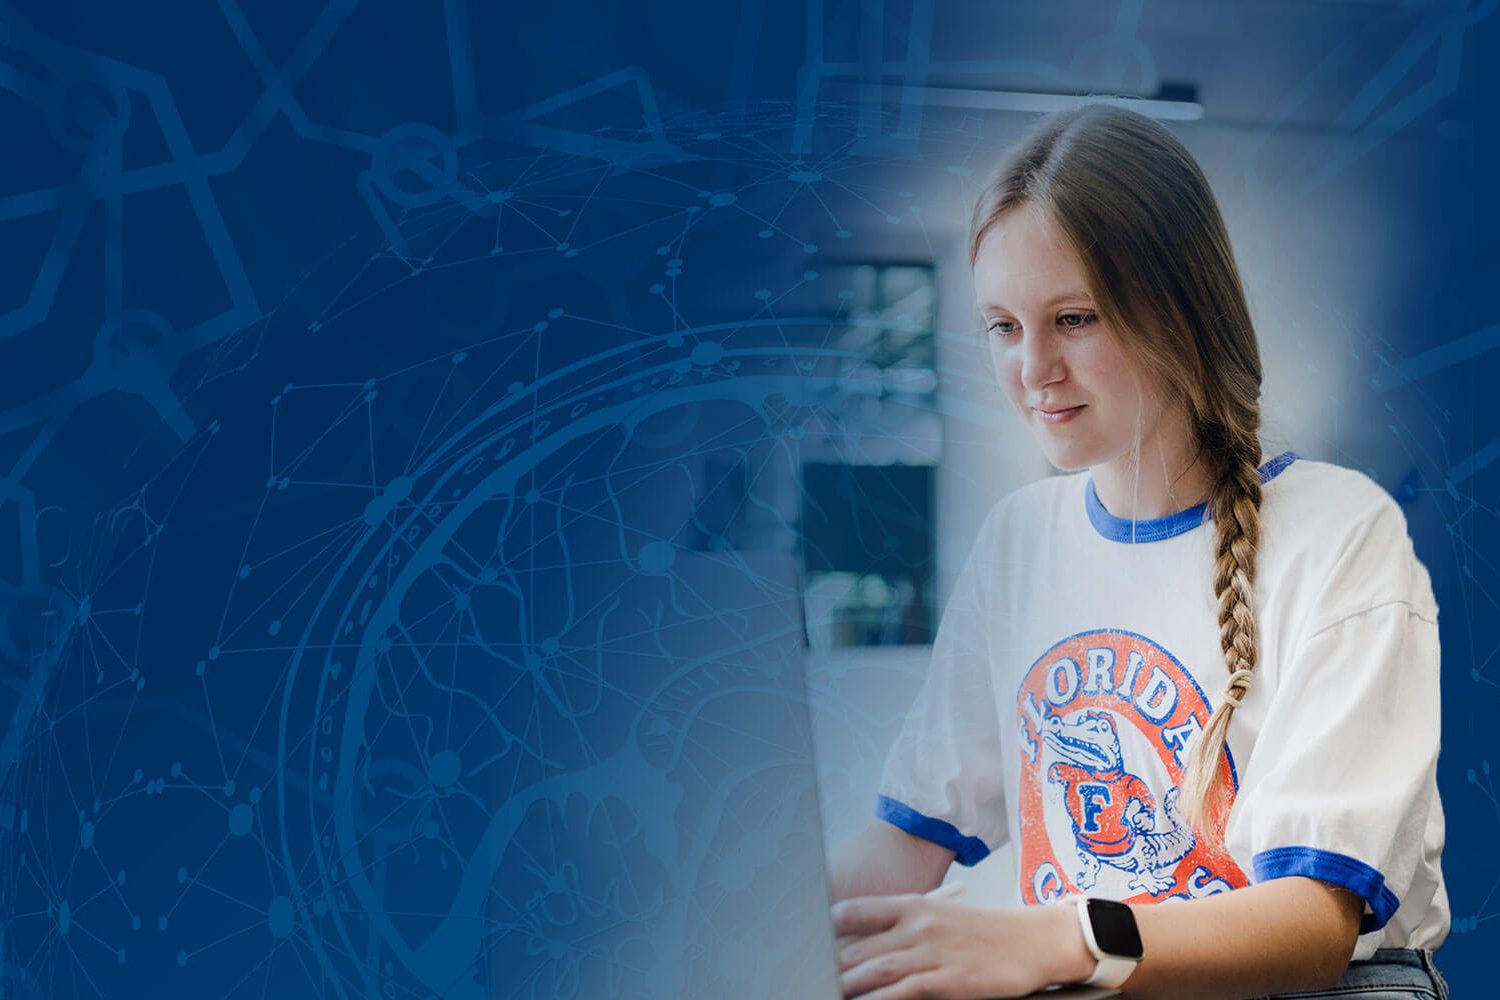 A female student in a UF T-shirt works at a laptop, superimposed over stylized graphics of a human brain, binary code, and electronic circuits.